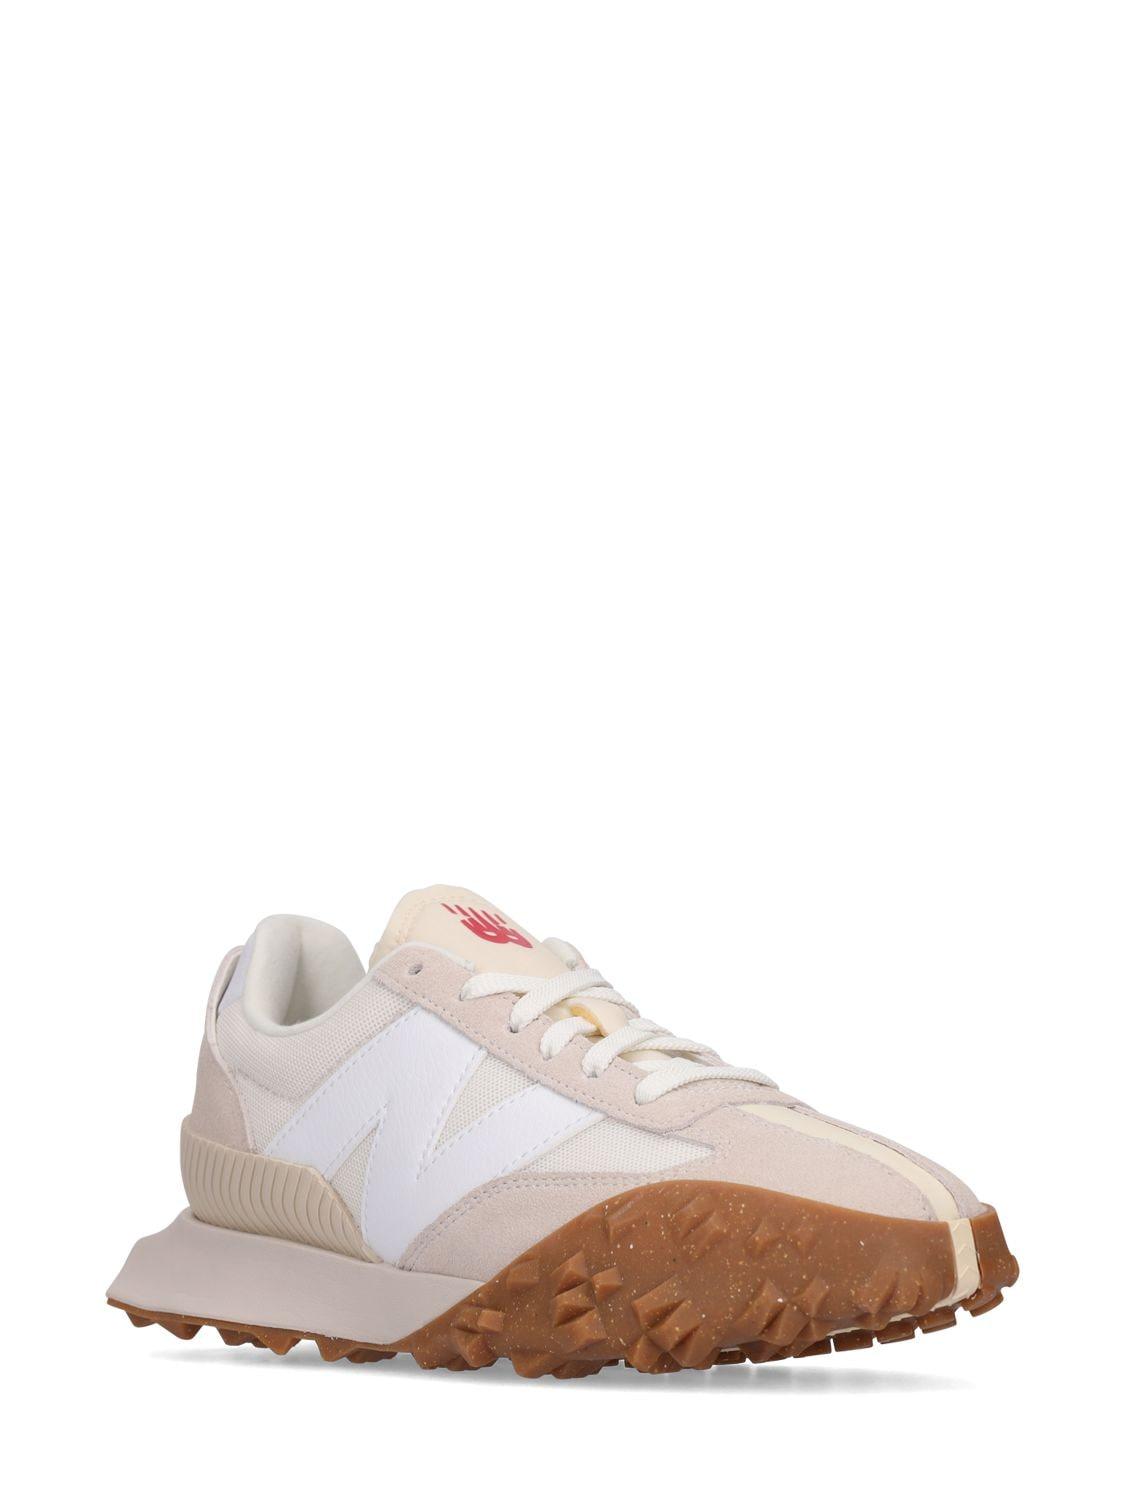 New Balance Uxc72 Gore-tex Sneakers in White | Lyst